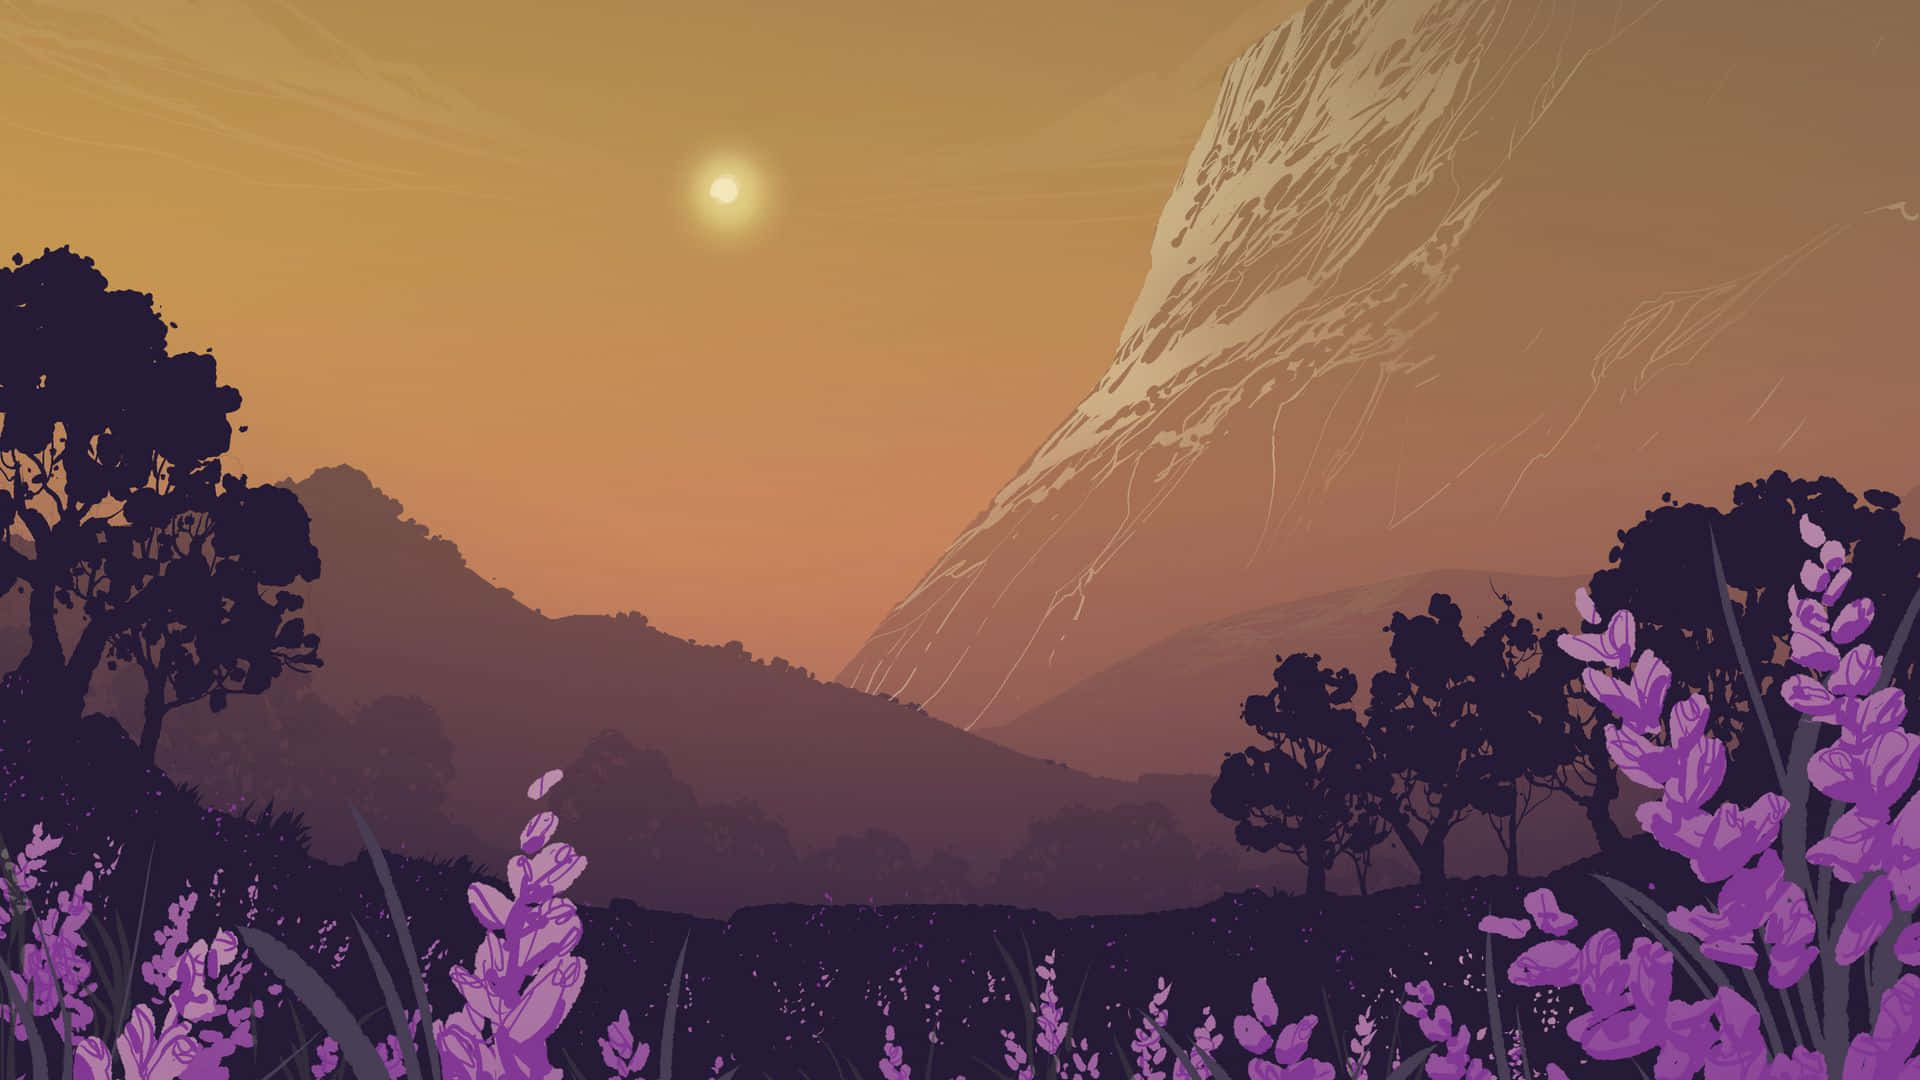 Get lost in Nature's beauty with Pixel Landscape Wallpaper